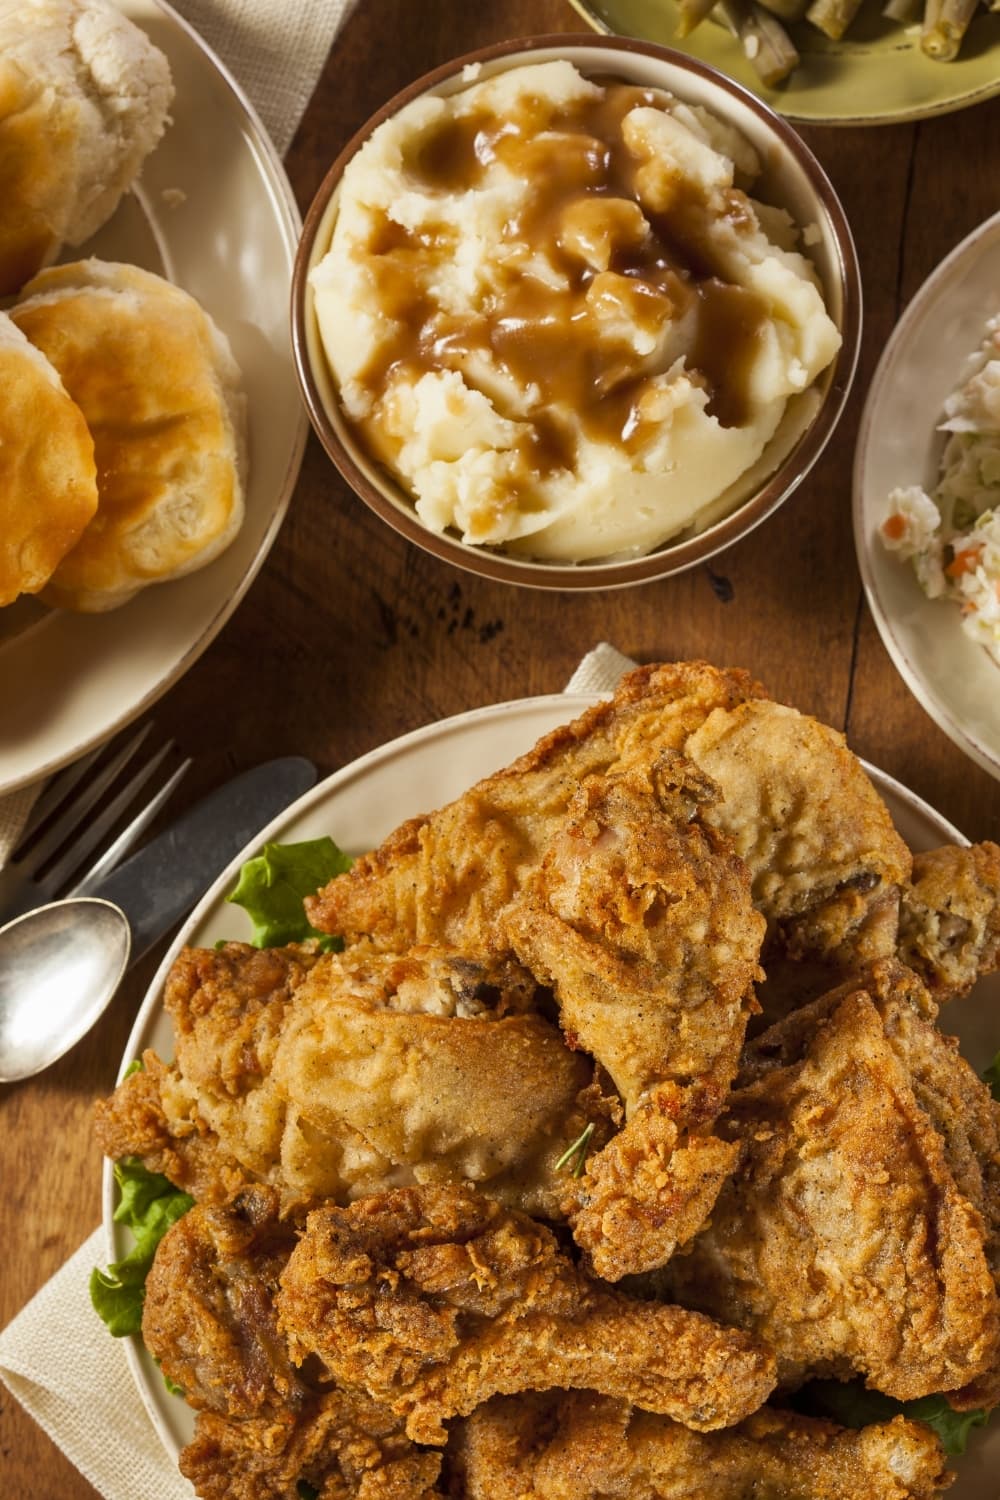 Fried Chicken with Mashed Potatoes and Biscuits